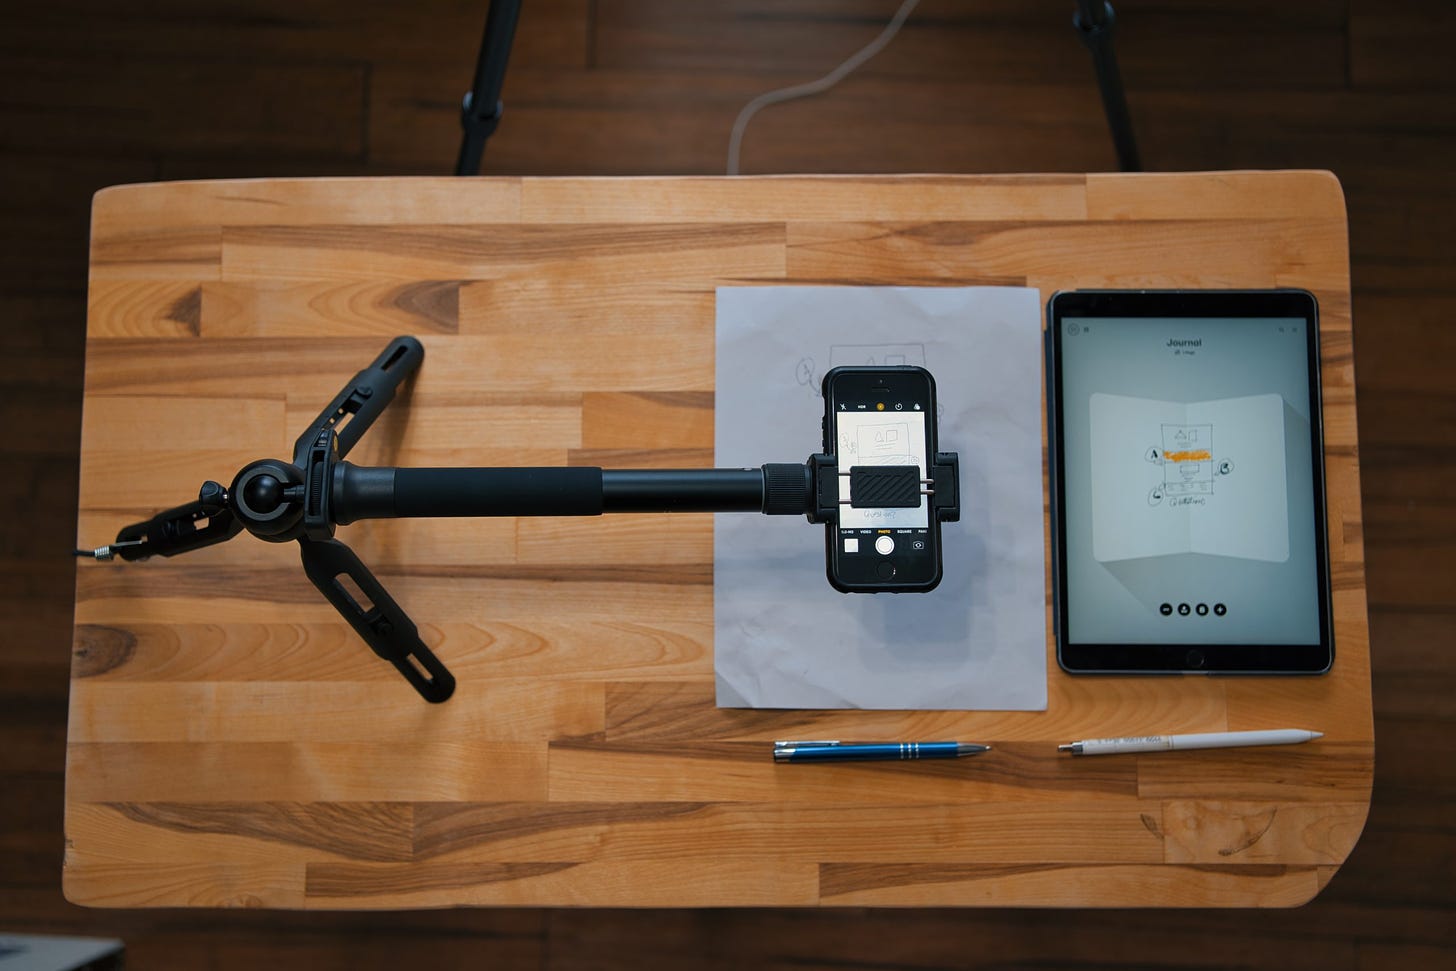 Overhead shot of tripod with extnesion holding an iPhone with the video camera app open, paper and pen below it, iPad pro and pencil beside it